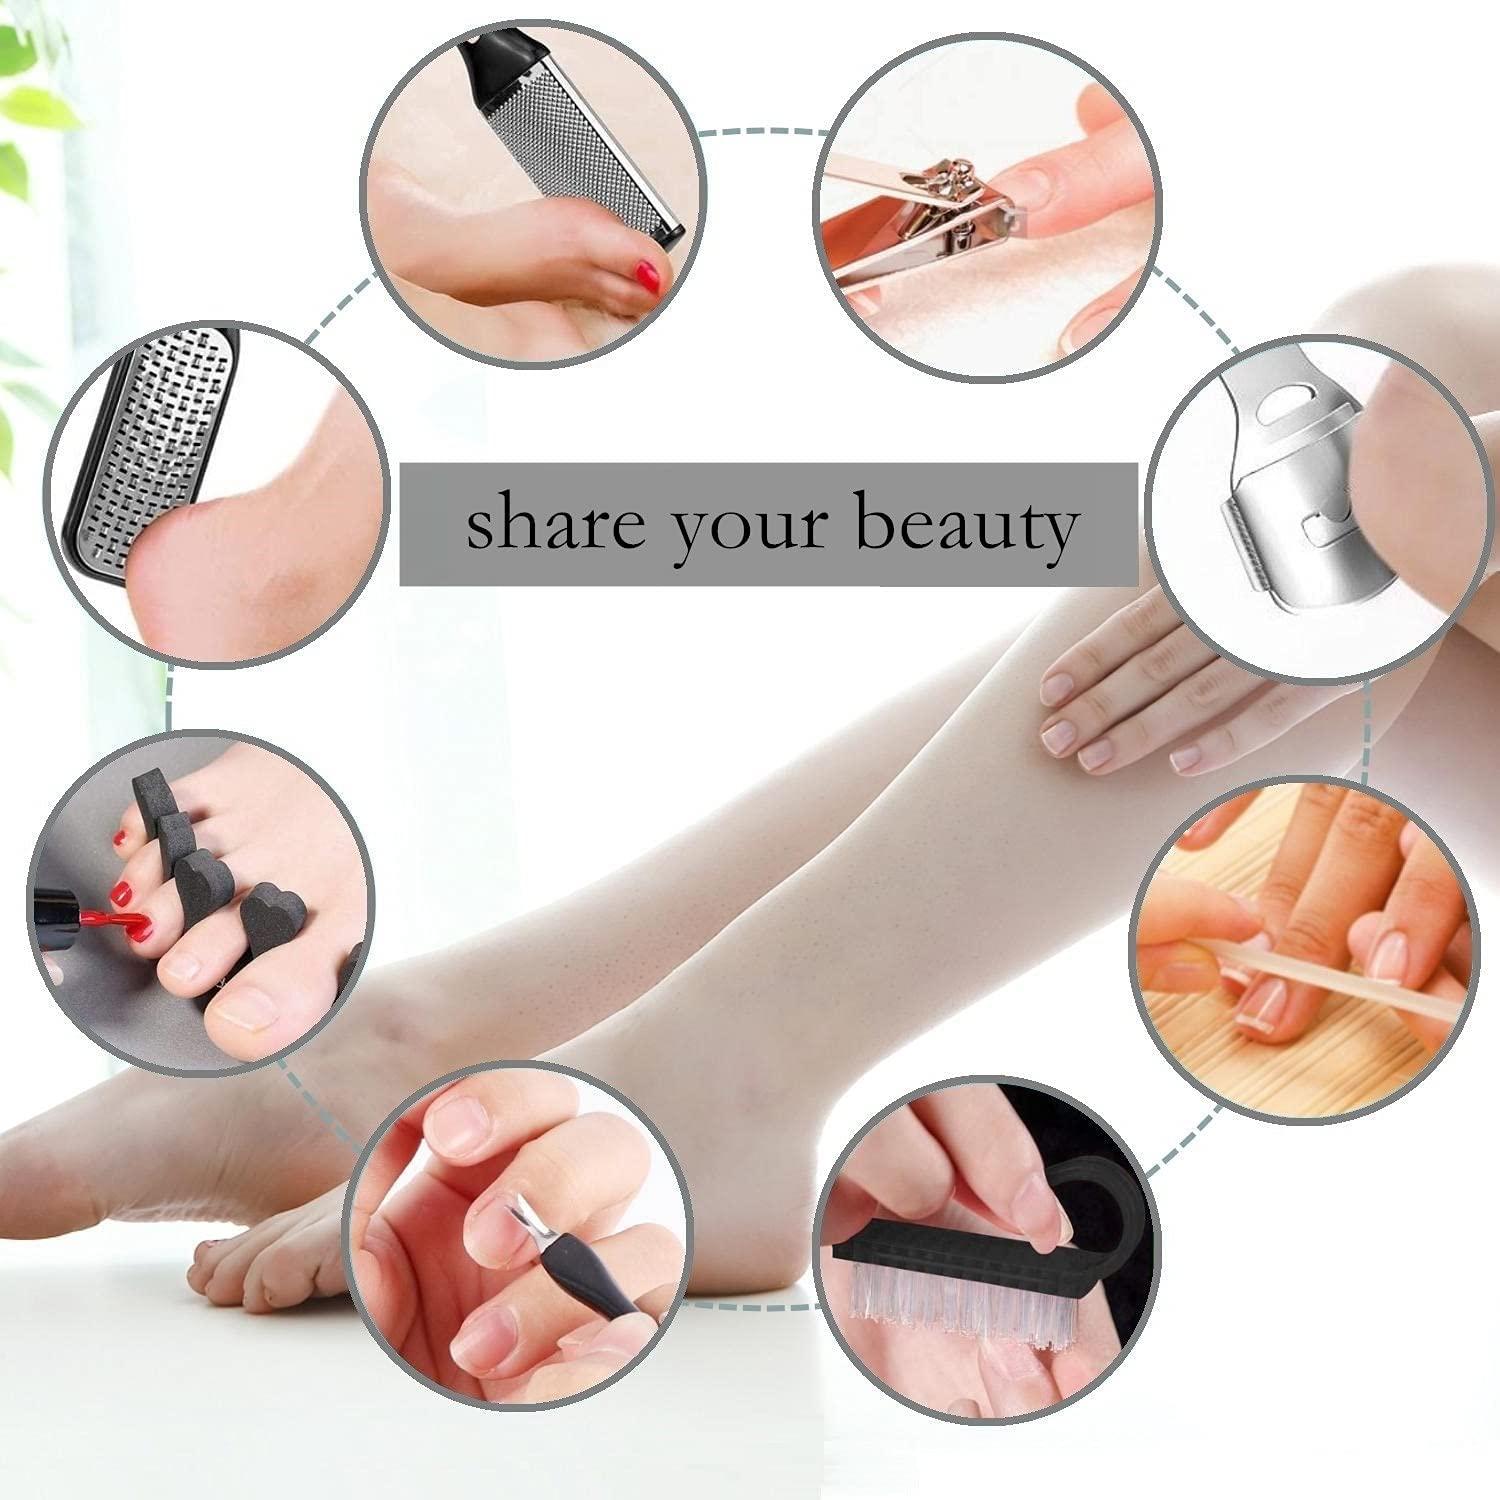 Electric Callus Remover for Feet, Professional Pedicure Kit Foot